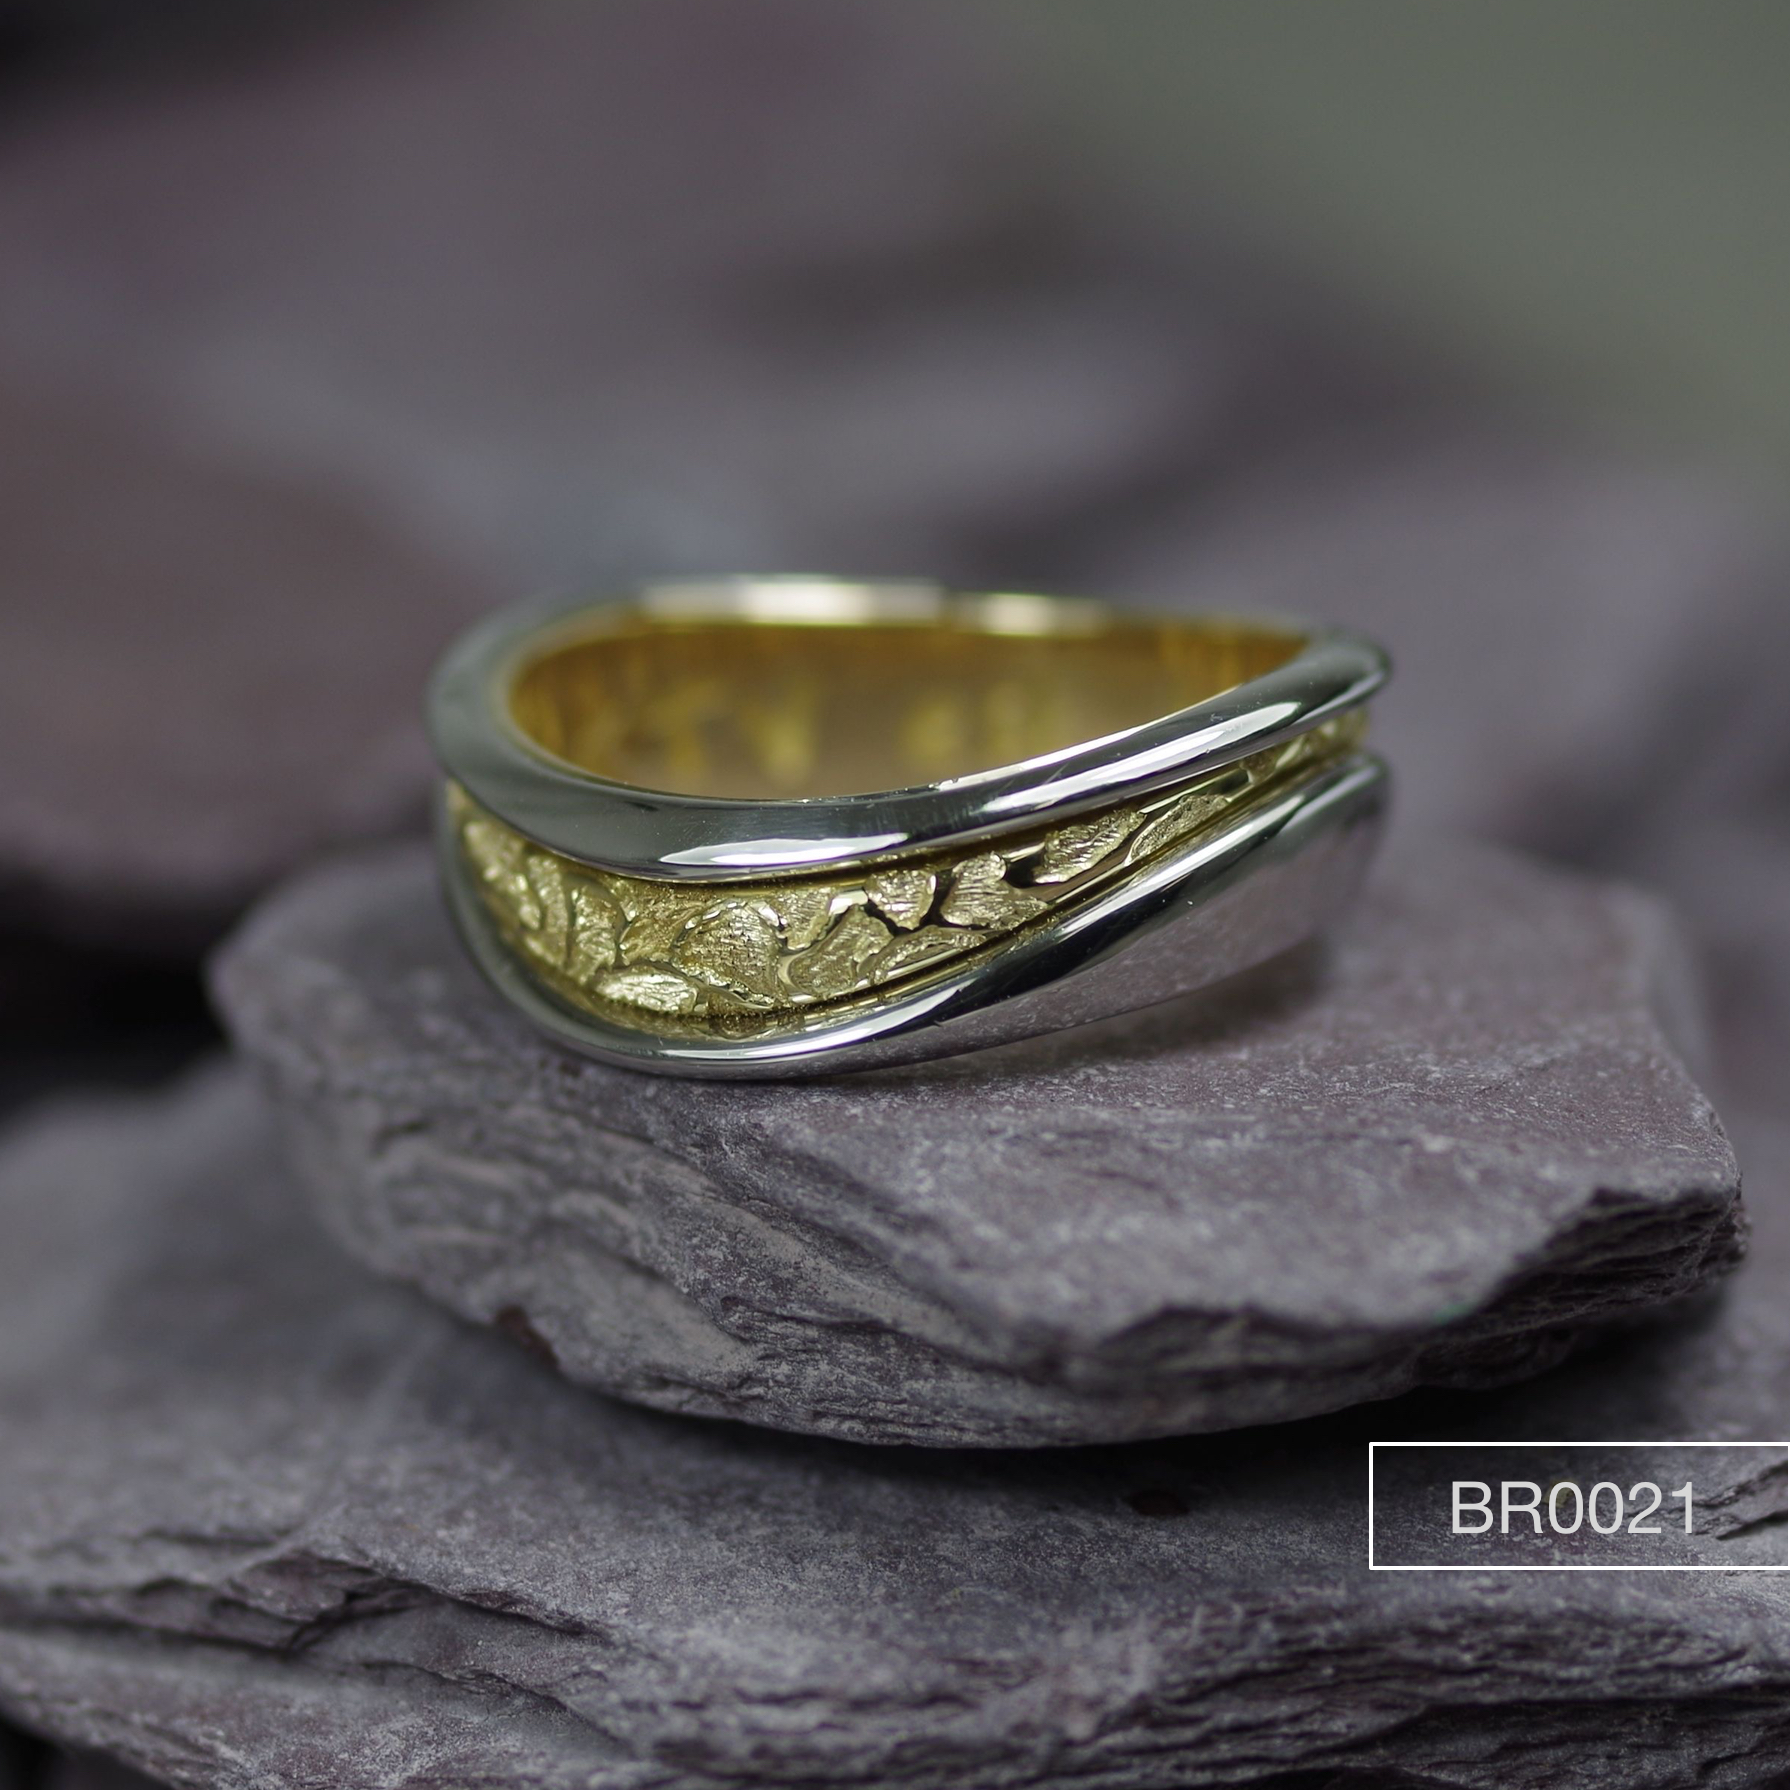 Platinum & patterned 18ct yellow Gold ring.